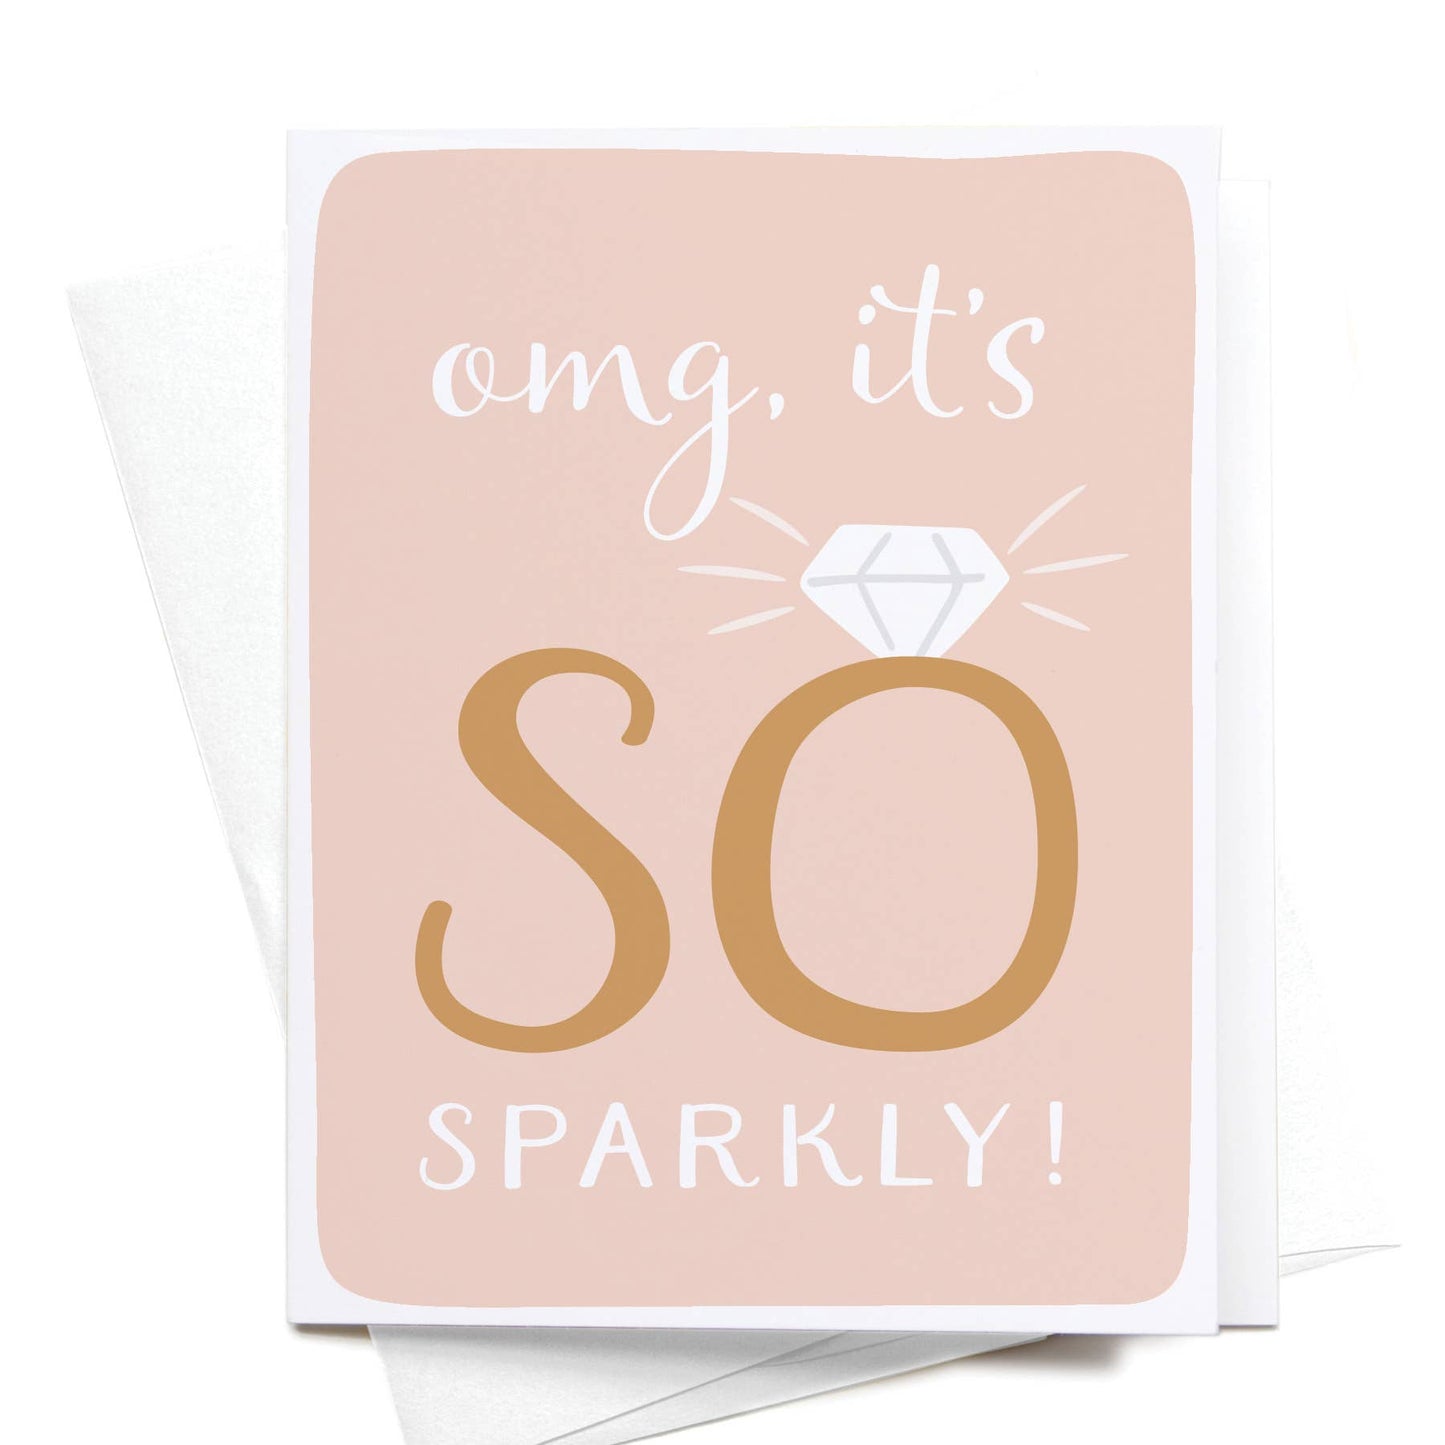 "OMG It's SO Sparkly!" Greeting Card